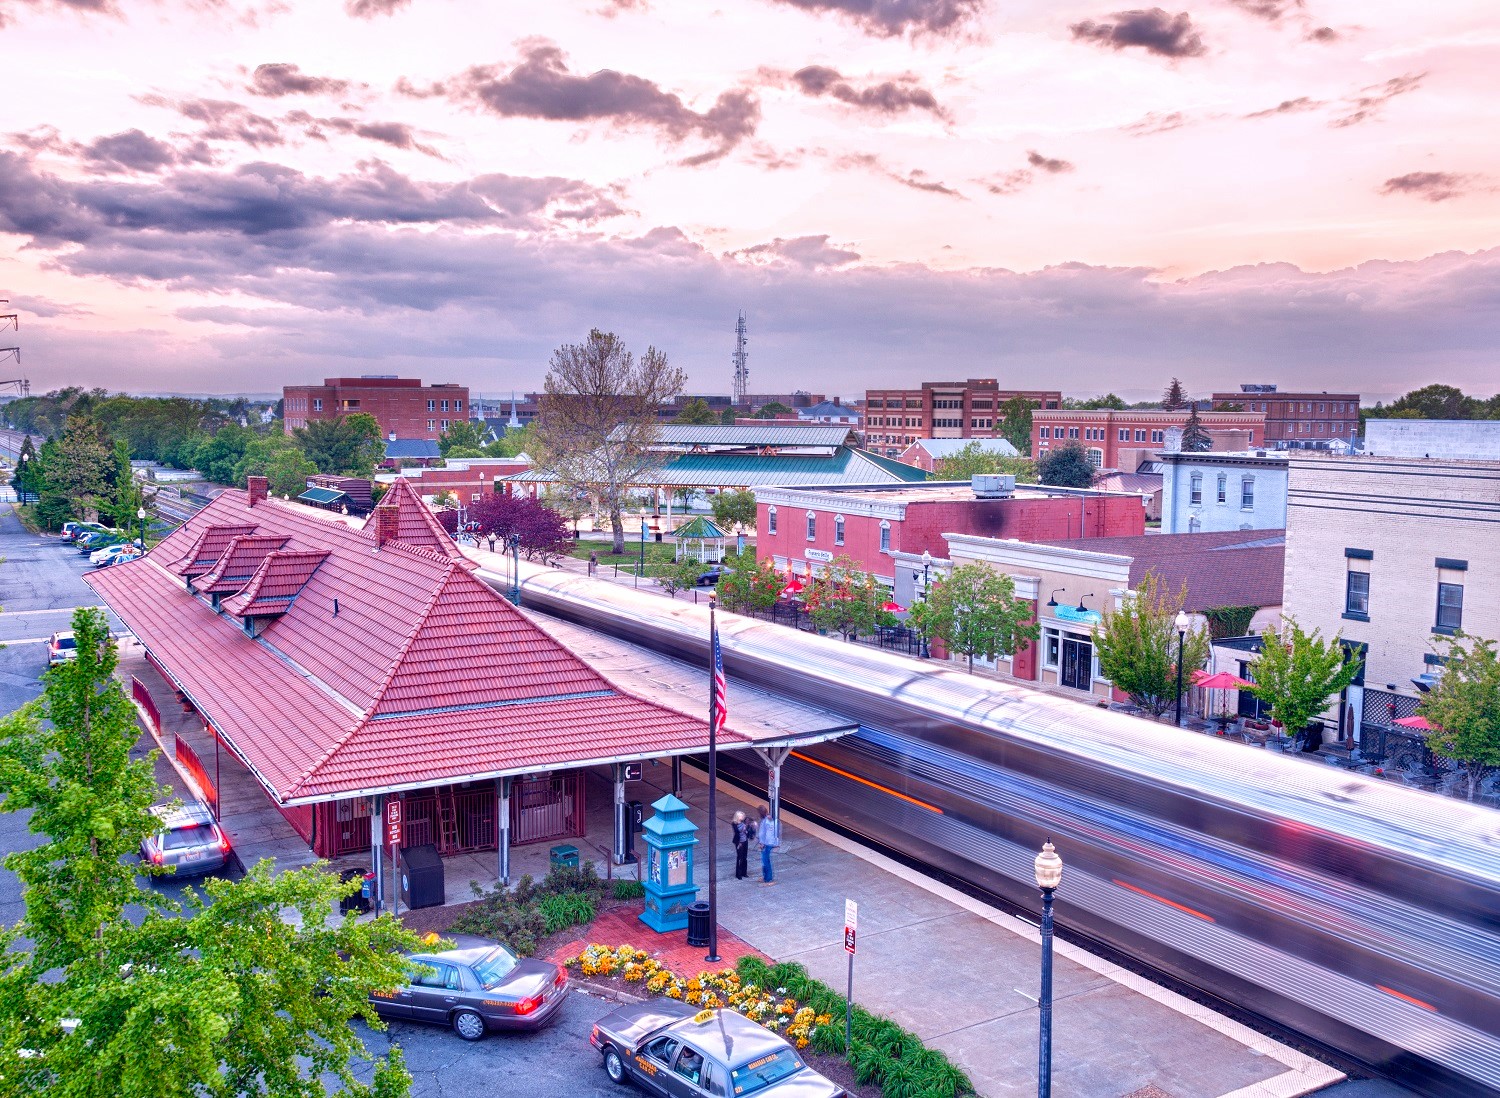 Find The Best Places That The Vibrant City Of Manassas, Virginia, Has To Offer To All Who Venture To Visit It